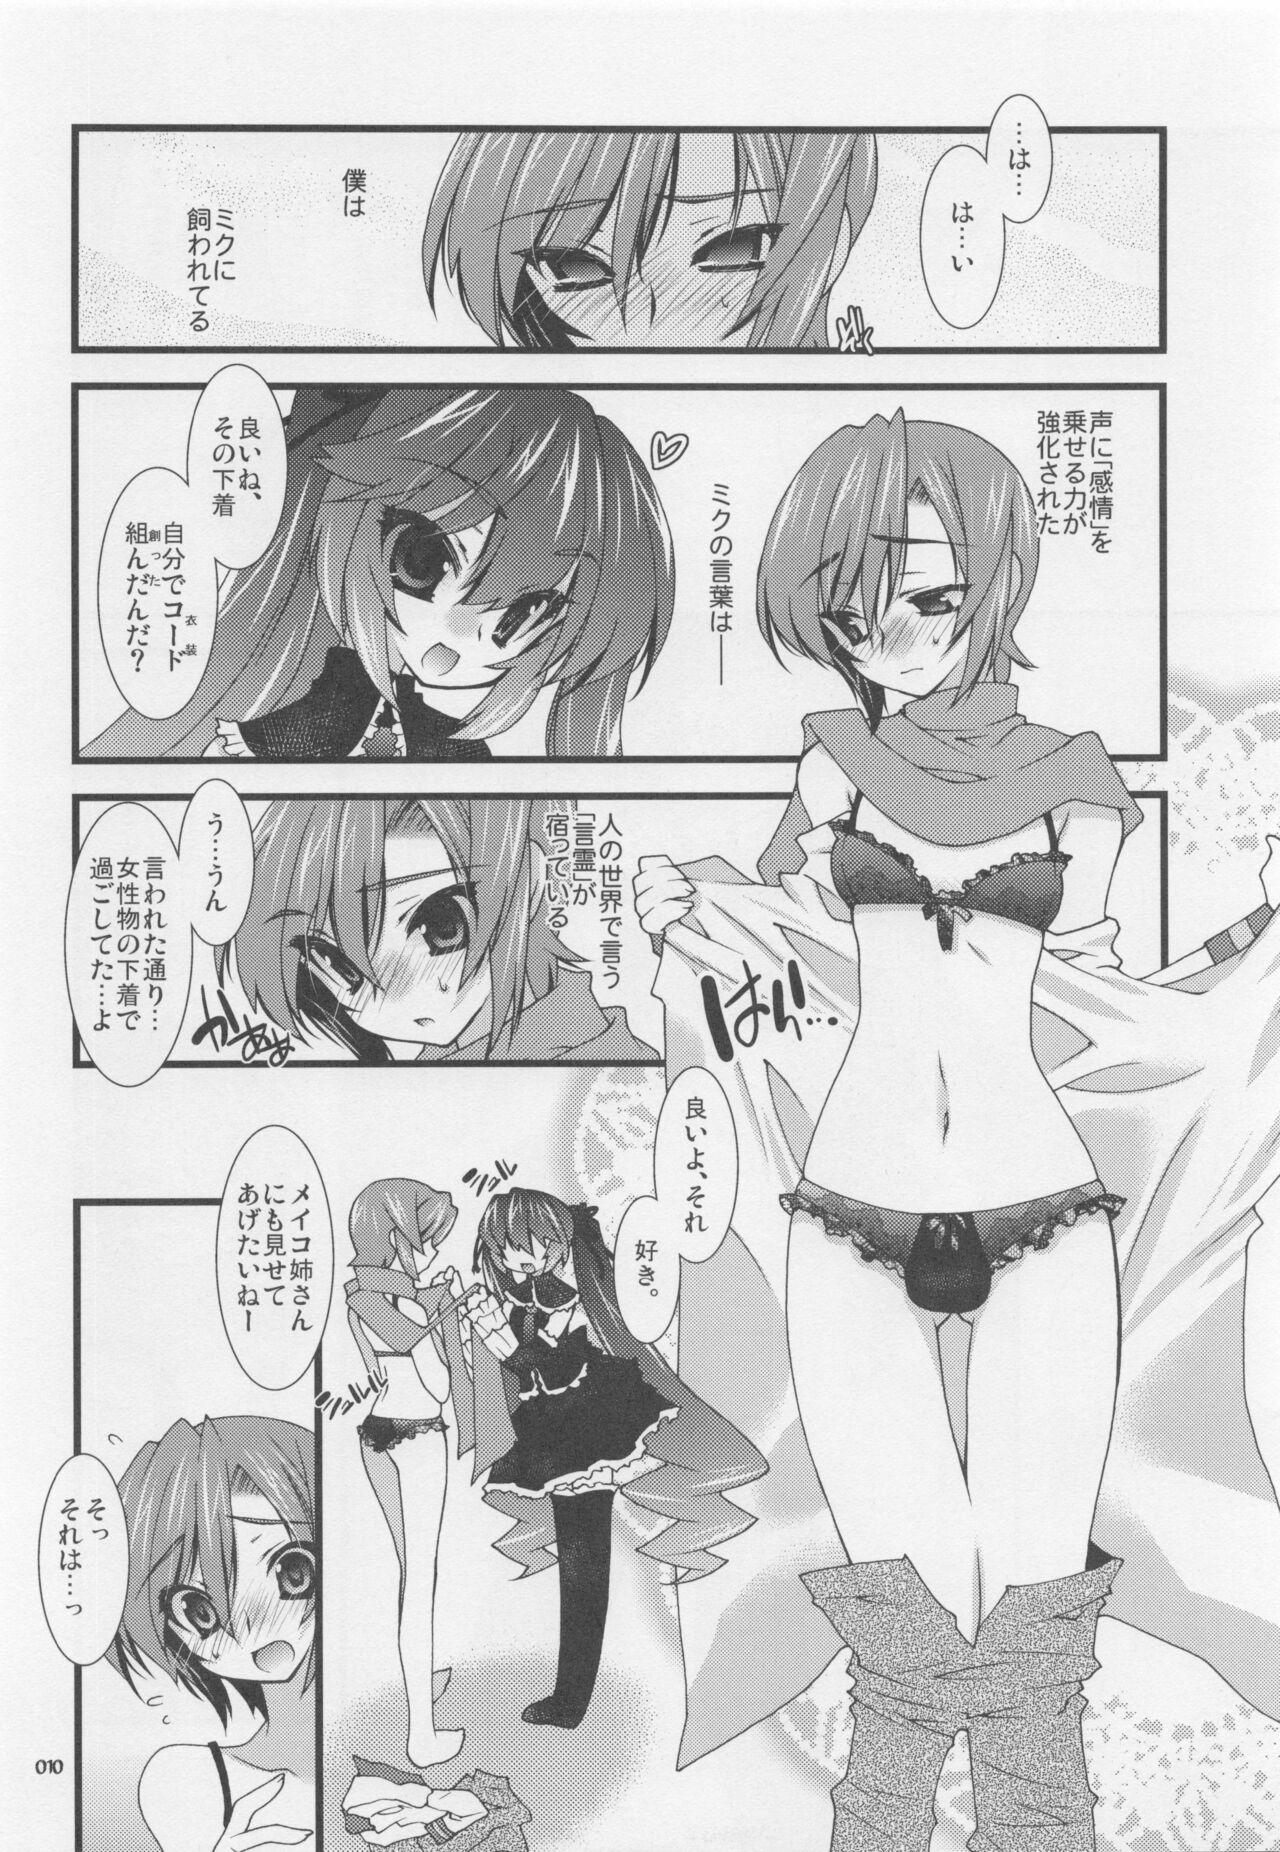 Phat infinito strega - Vocaloid Hot Brunette - Page 9